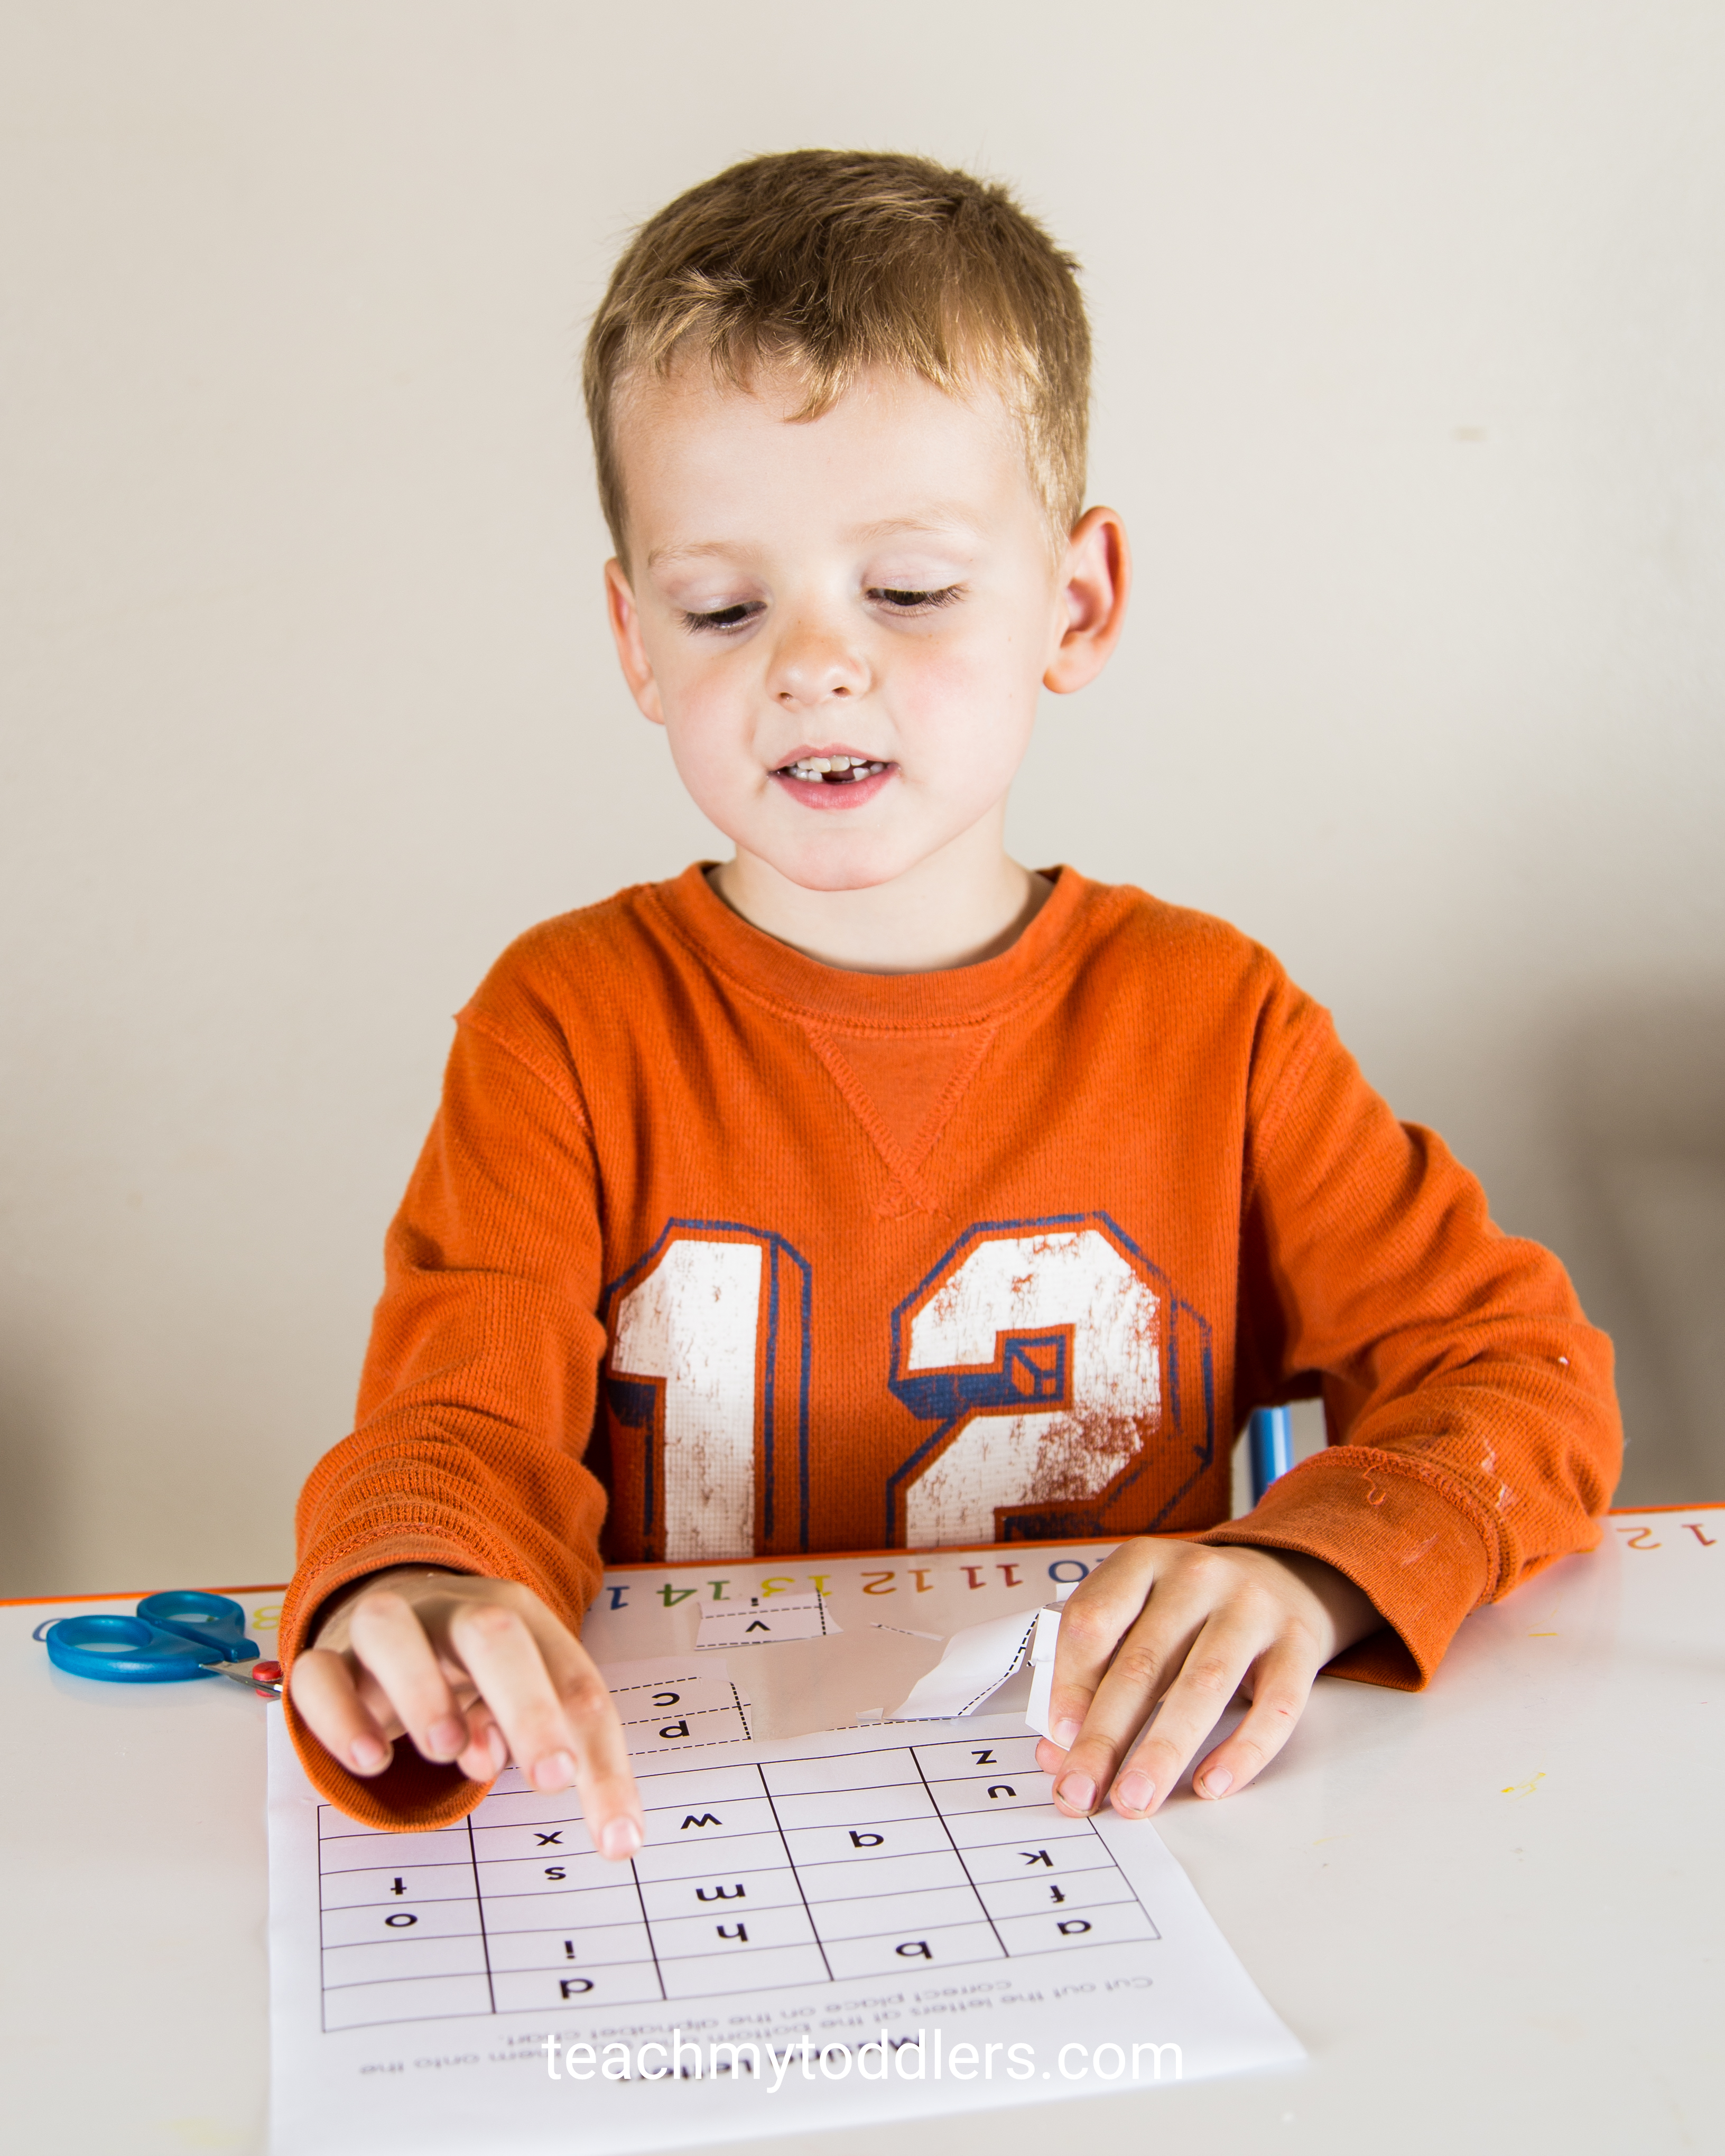 Discover how to use this missing letters activity to teach your toddlers letters